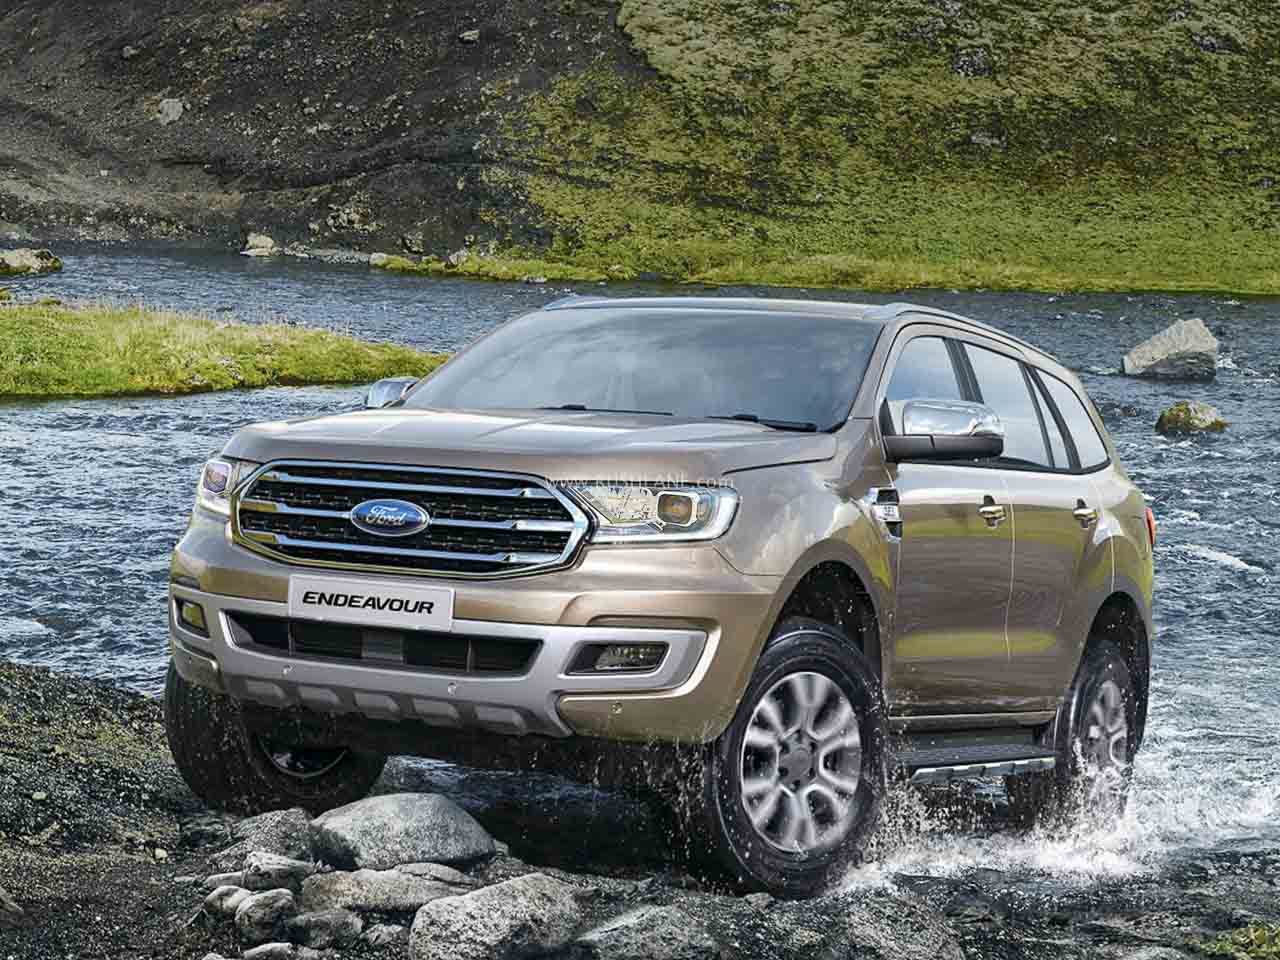 Facelifted Ford Endeavour BS6